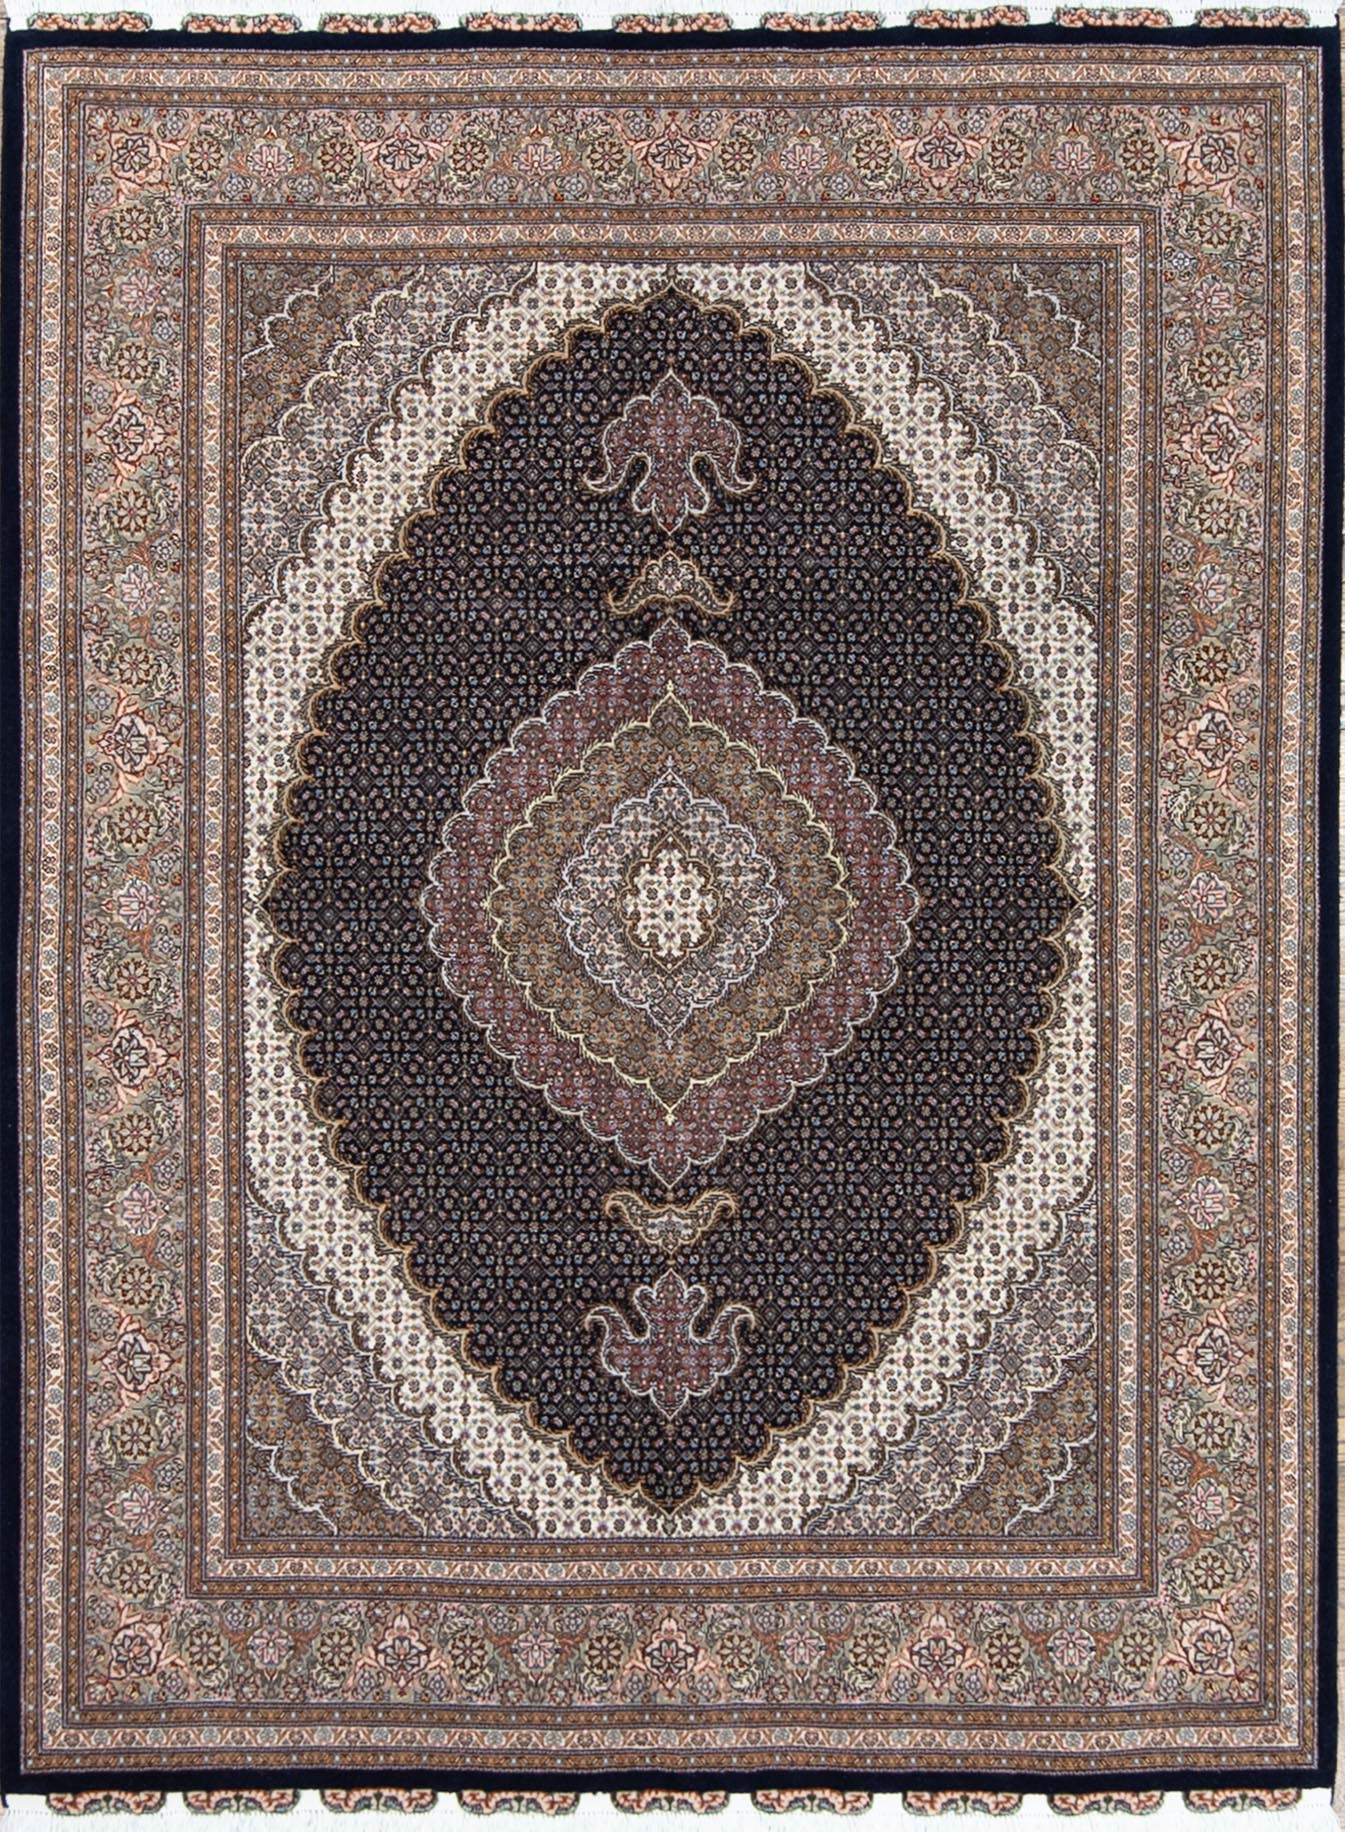 Handmade Persian Tabriz wool and silk area rug in black and green colors. Size 5.3x7.